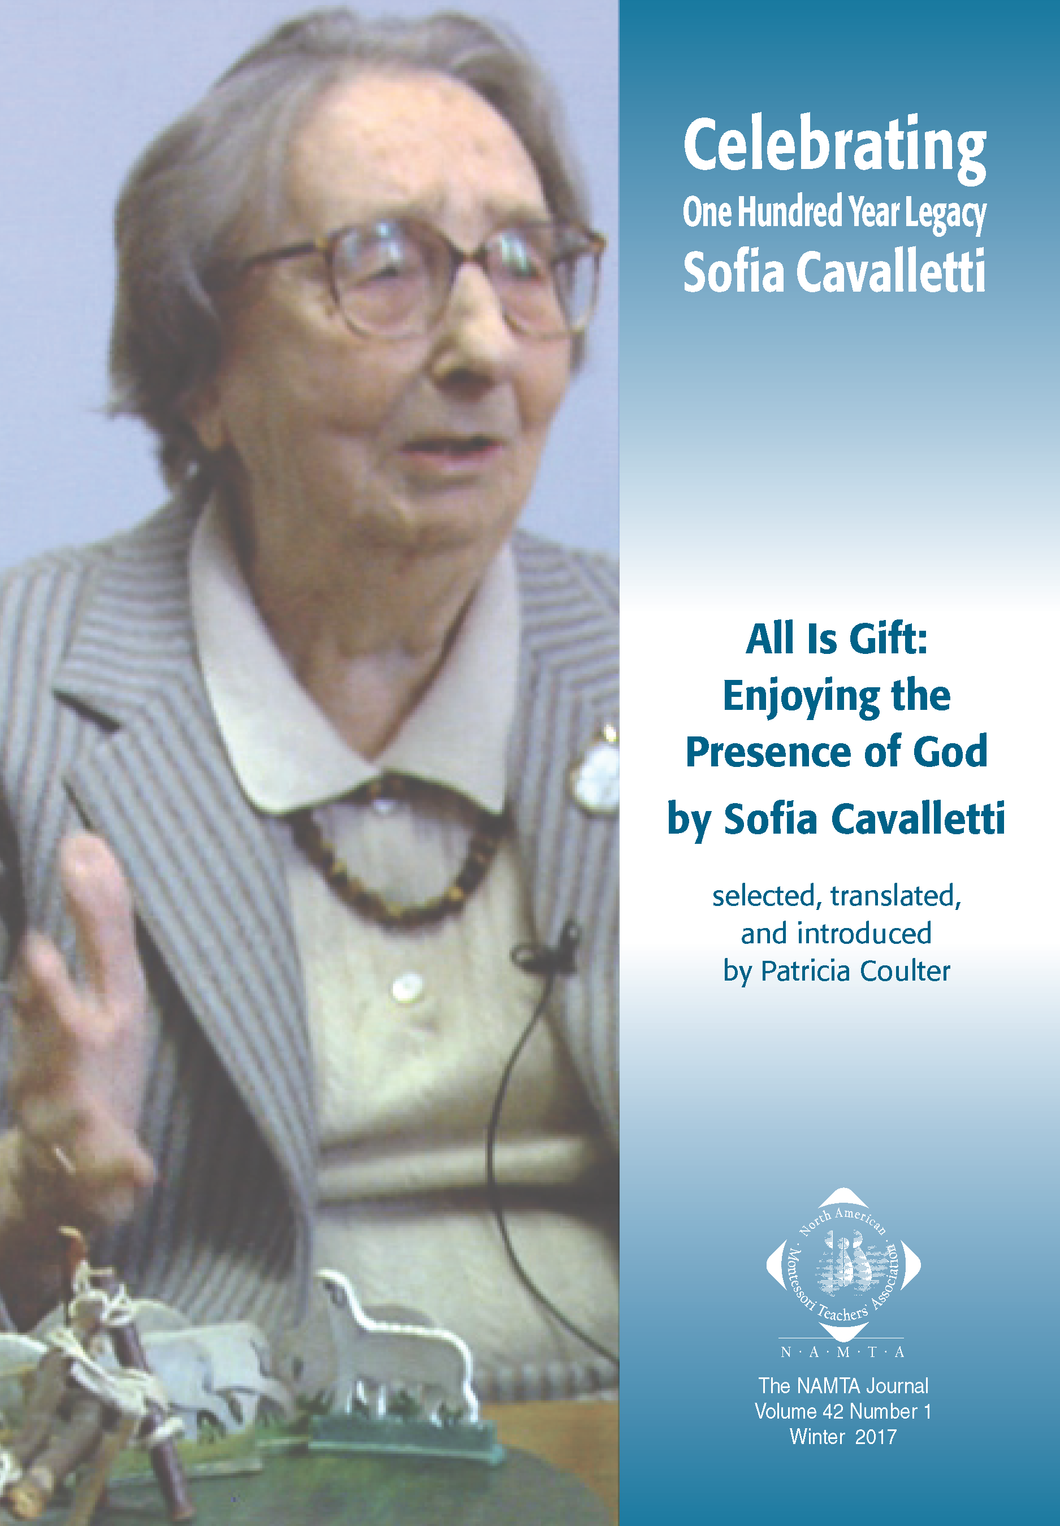 Vol 42, No 1: All is Gift: Enjoying the Presence of God by Sofia Cavalletti